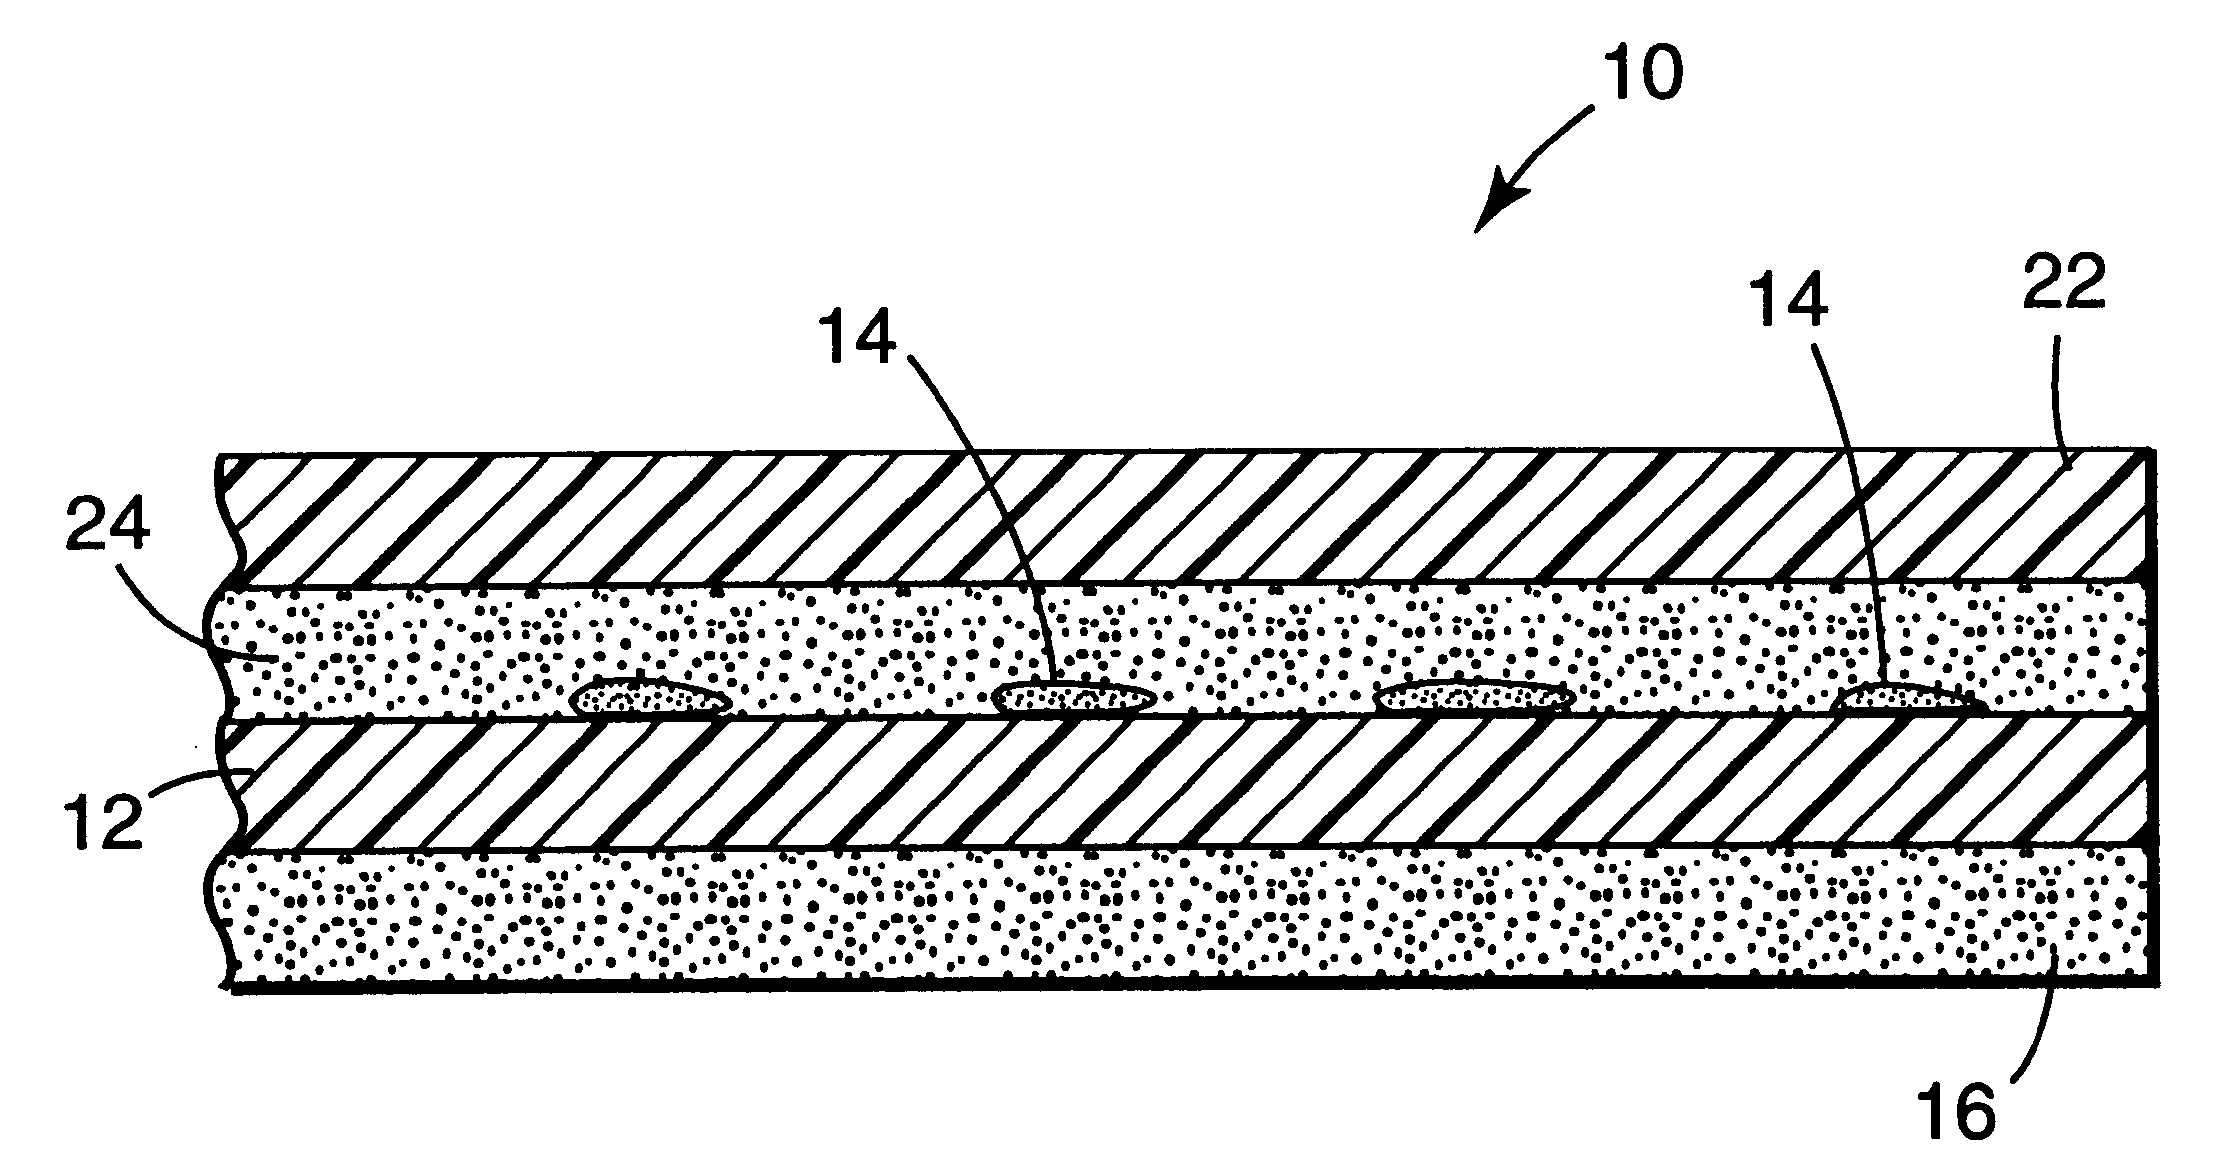 Method of stabilizing films or membranes using adhesive as a reservoir